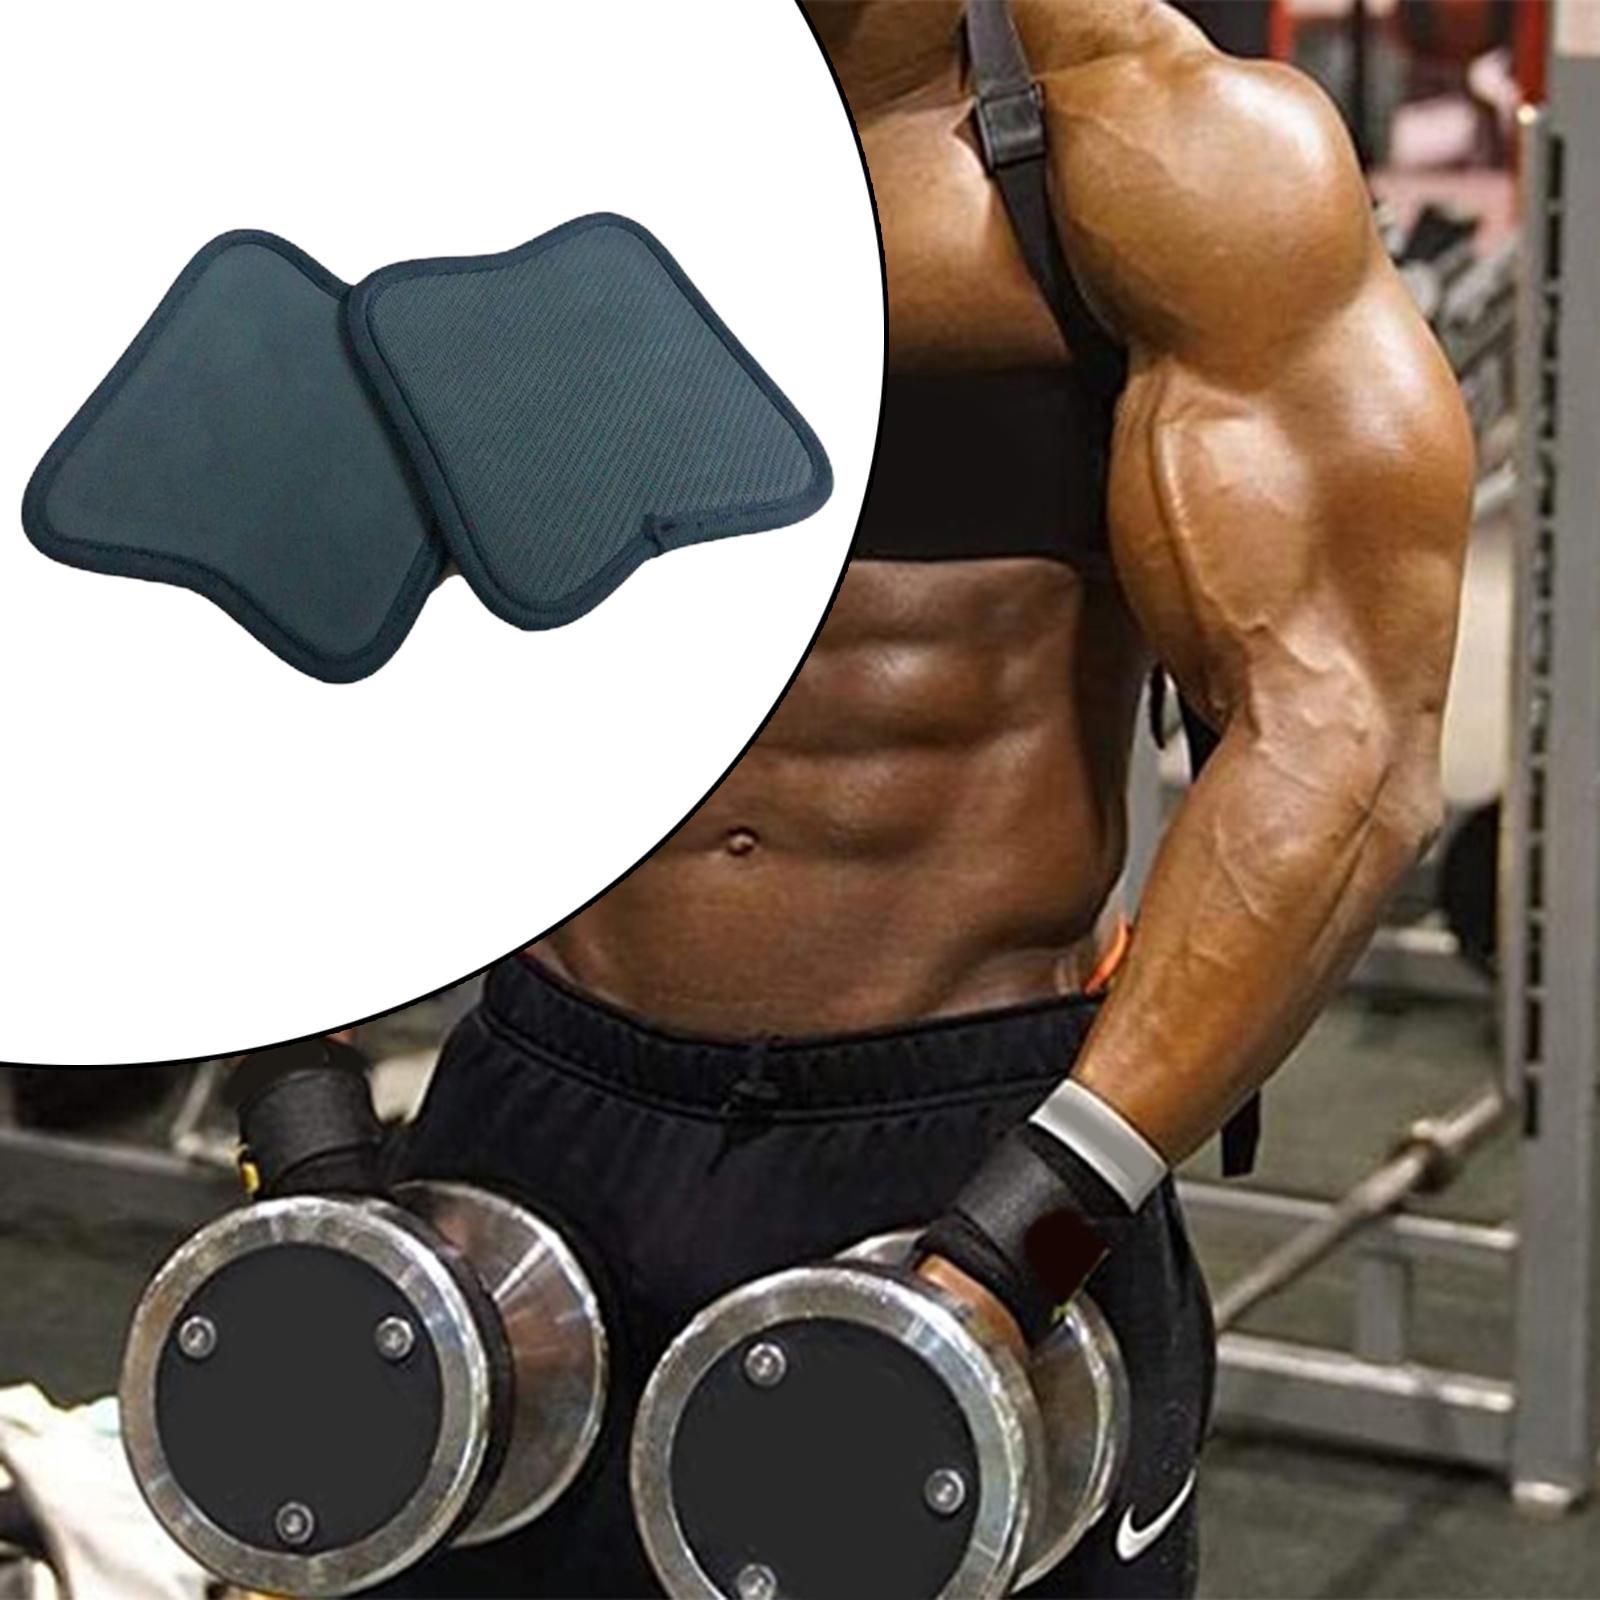 2x Fitness Lifting Neoprene  1 Pair Weight Lifting Training  workout and gym Palm Exercise s unisex adult  Non